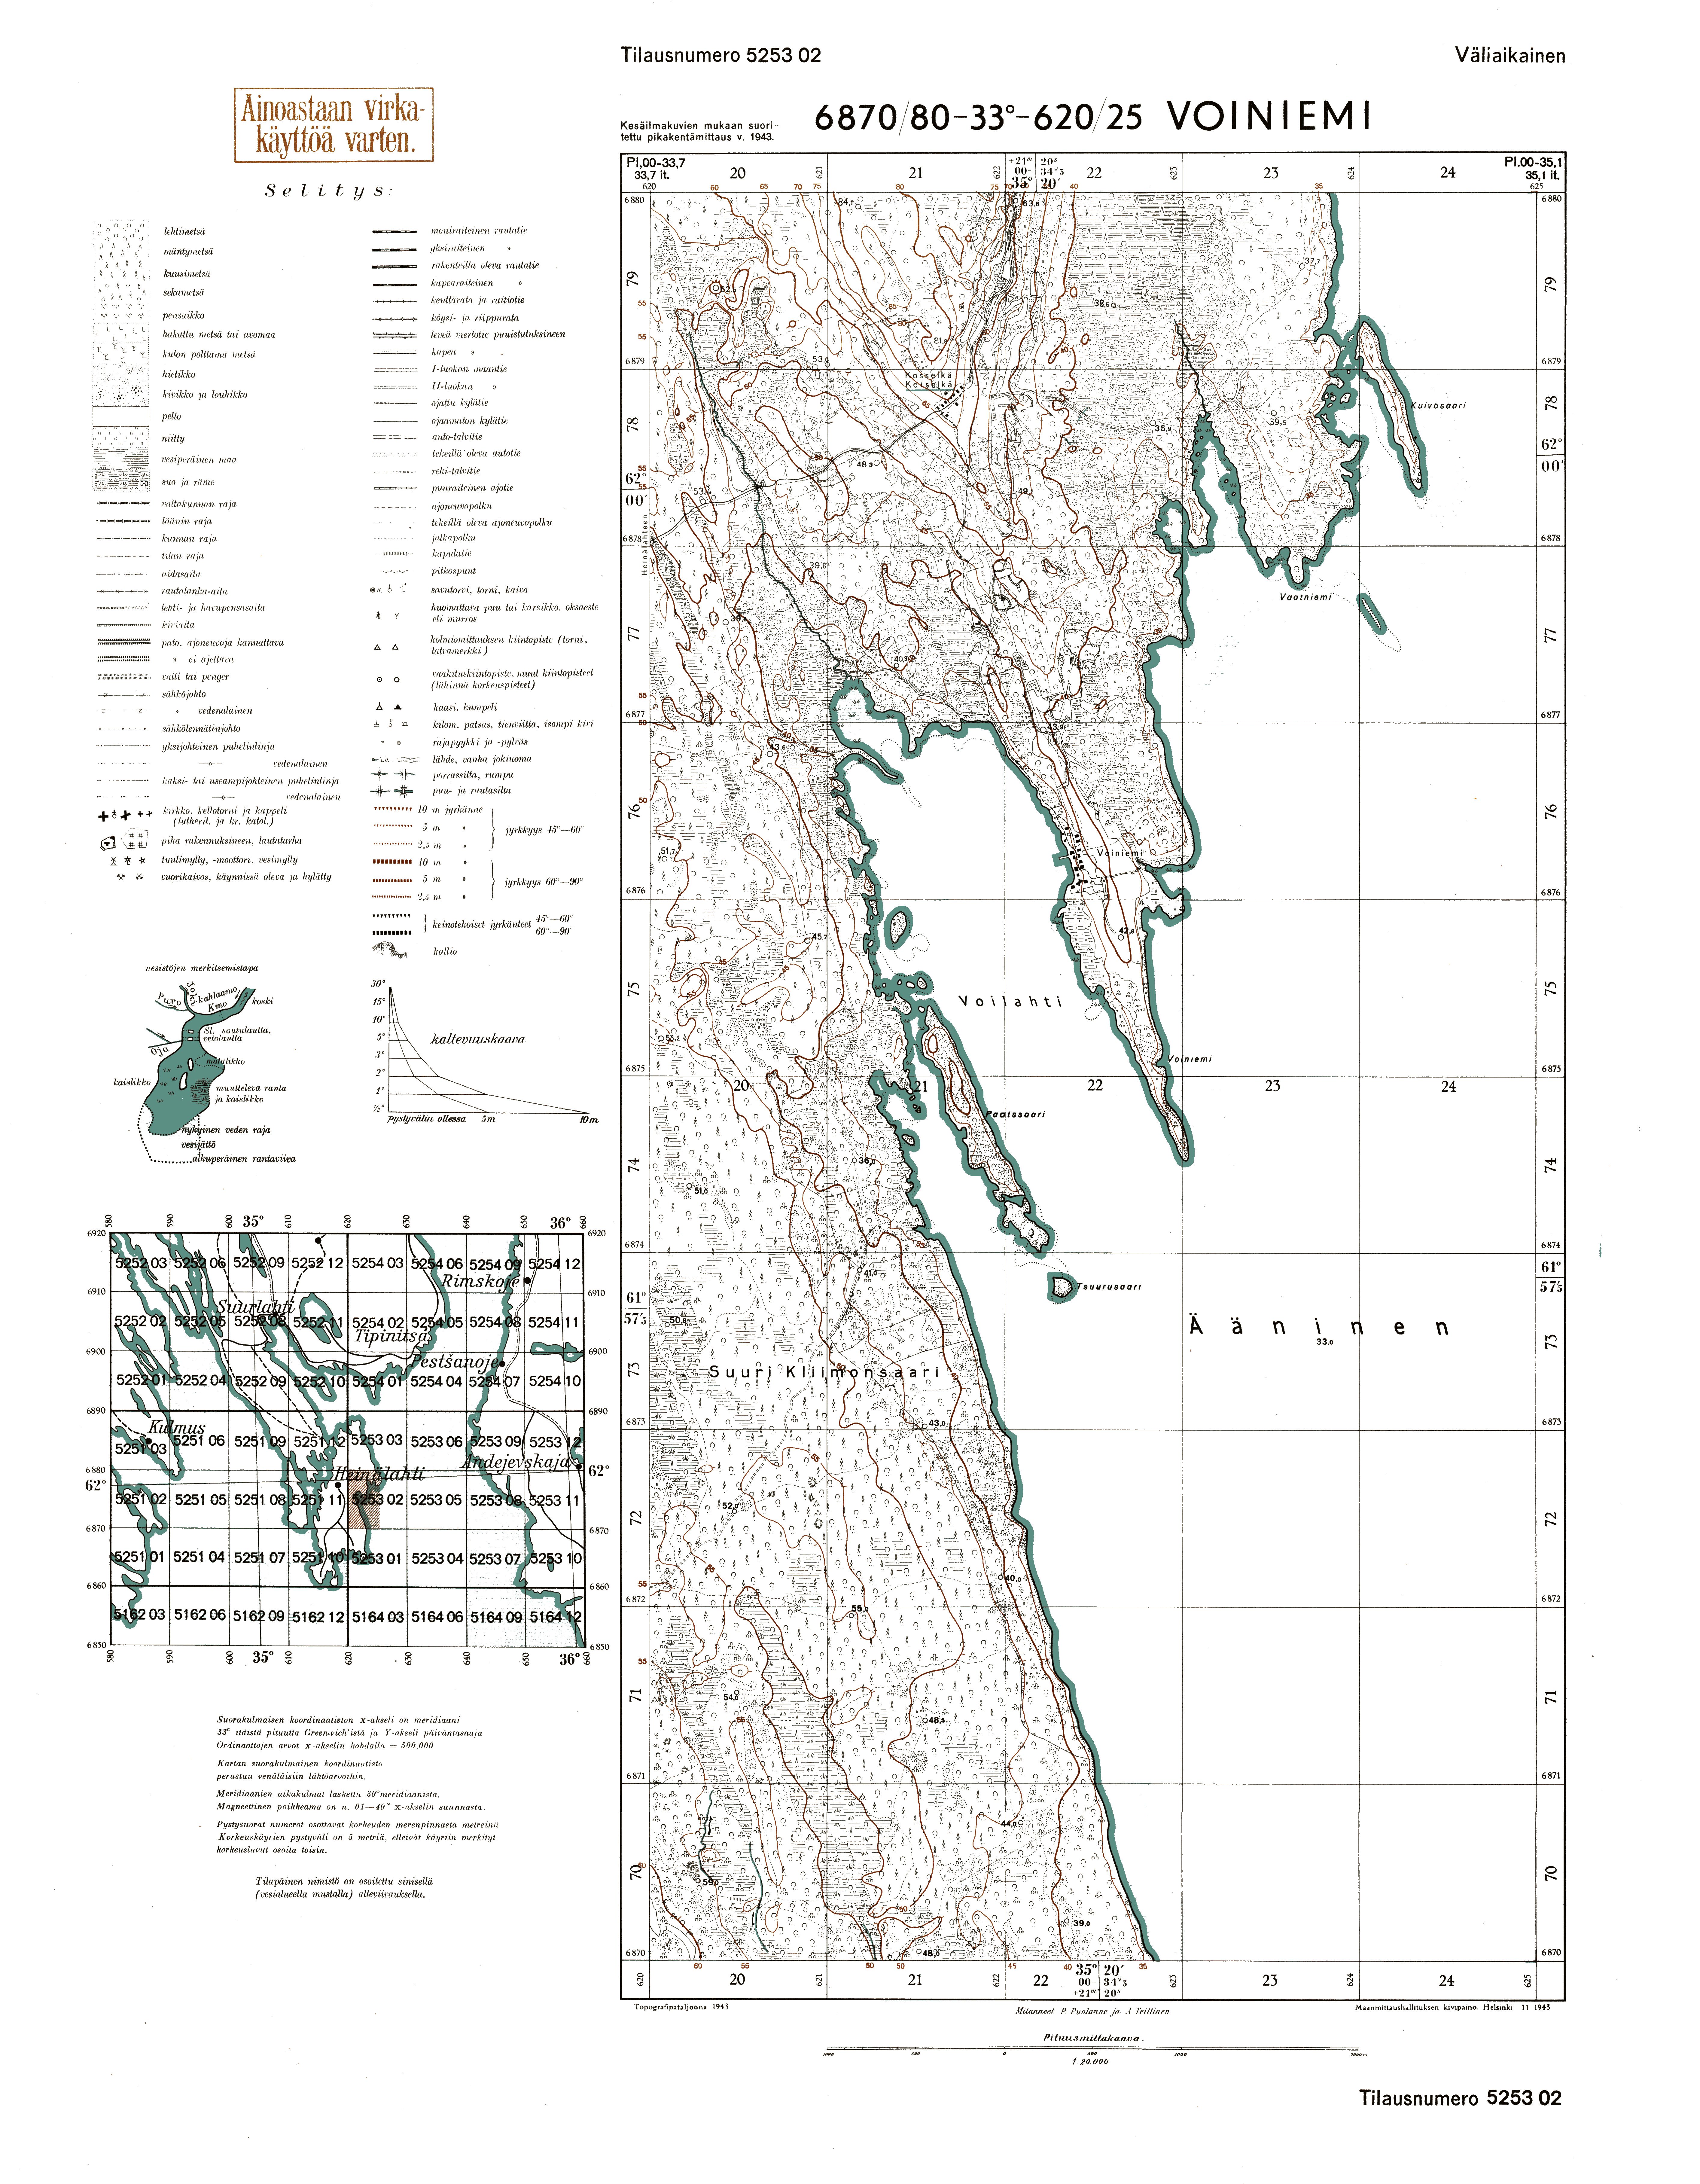 Voinavolok Village Site. Voiniemi. Topografikartta 525302. Topographic map from 1943. Use the zooming tool to explore in higher level of detail. Obtain as a quality print or high resolution image